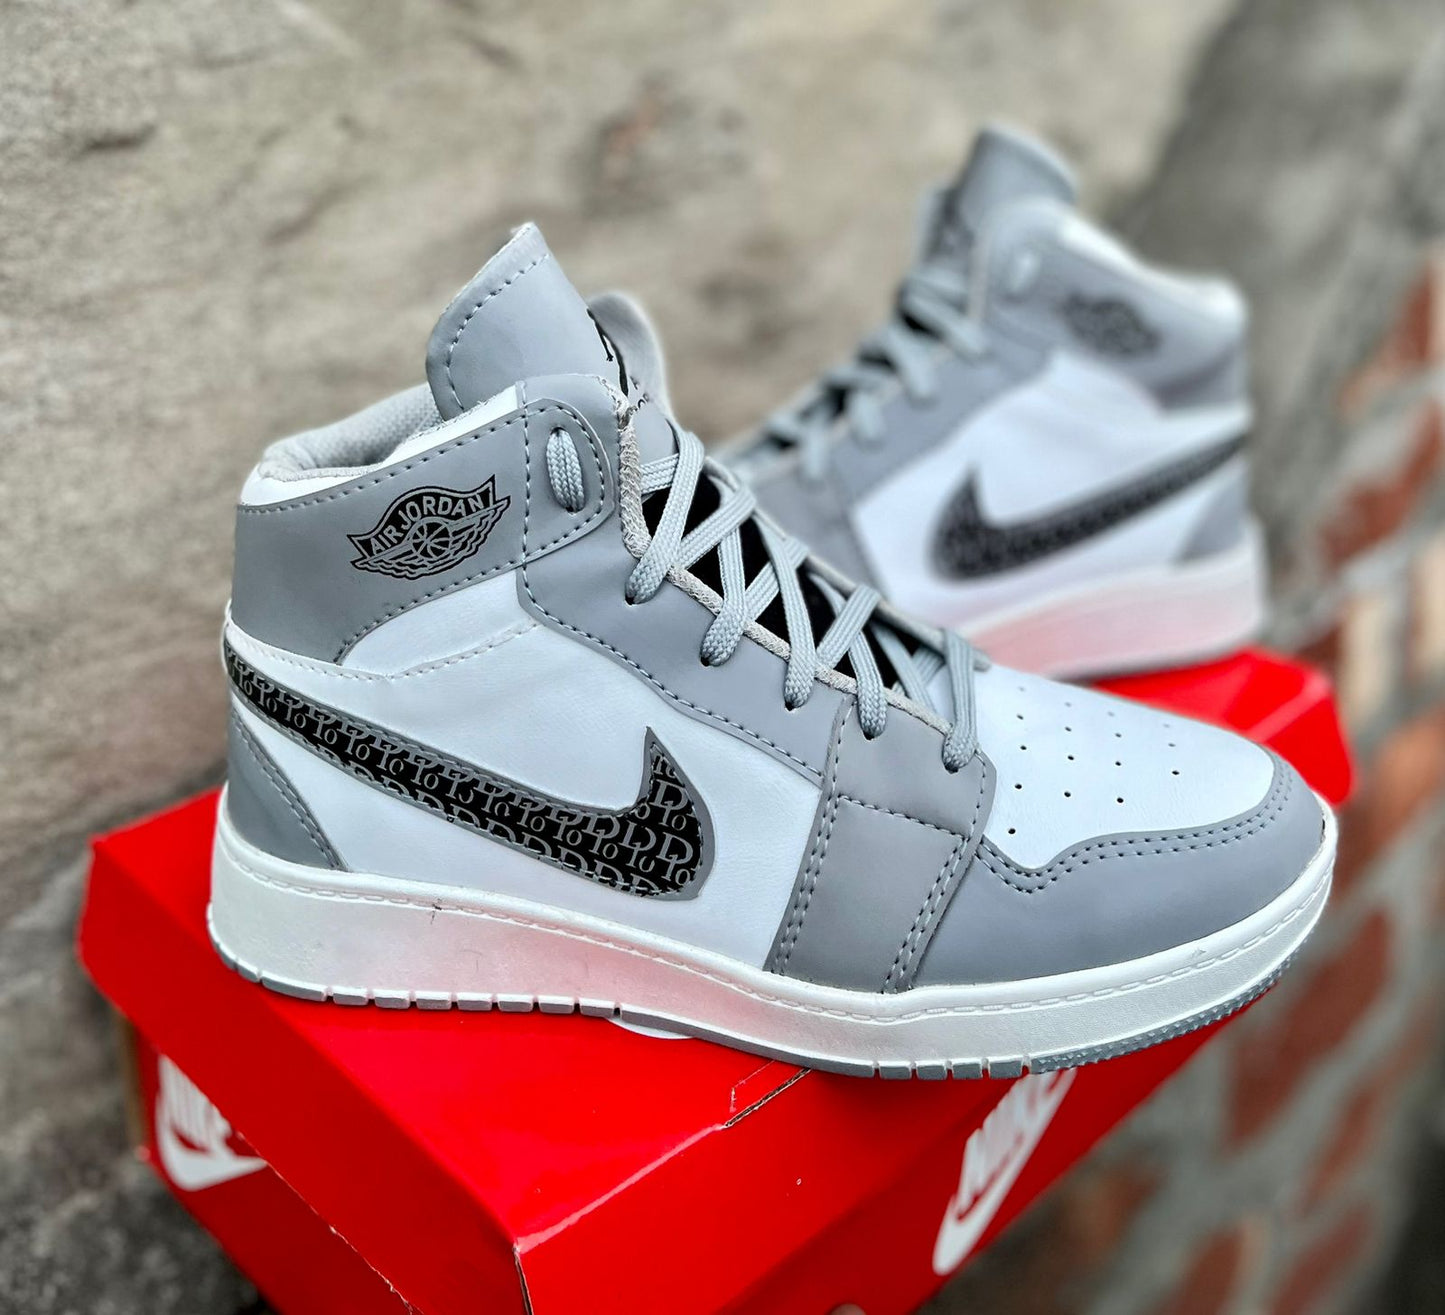 Premium quality imported NIKE shoes